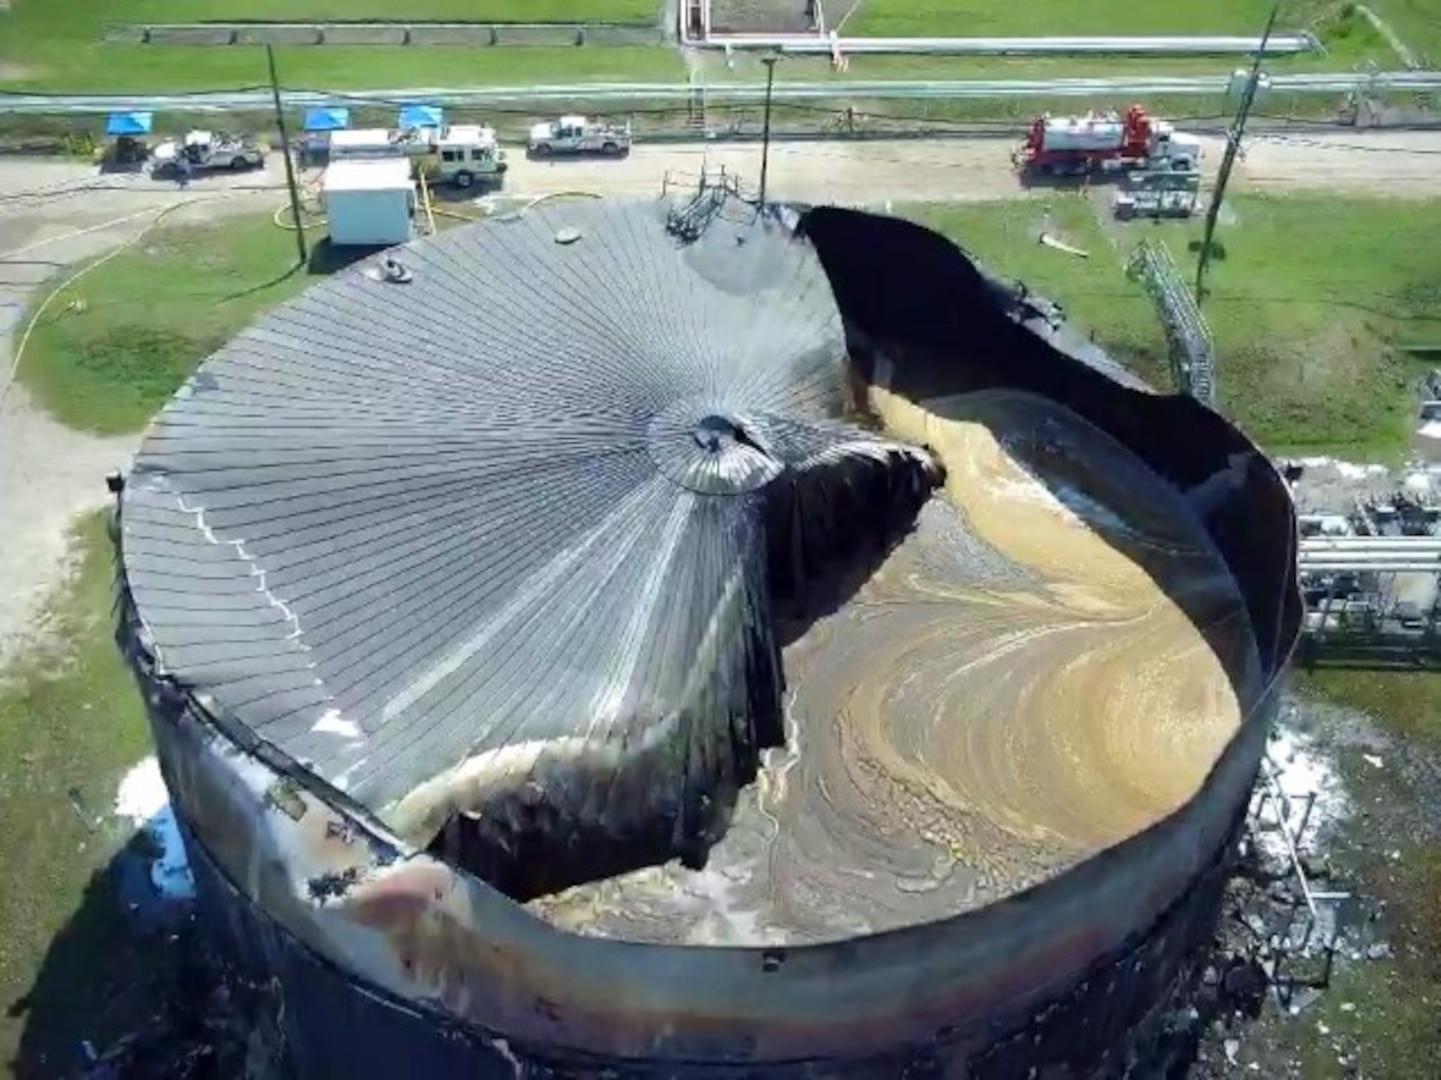 A drone surveillance photo of a Chevron oil storage tank that caught on fire in Pasadena, Texas, Aug. 18, 2020. There were no injuries or deaths, but the fire burned through the steel tank roof and forced the temporary closure of the Houston Ship Channel. U.S. Coast Guard photo by Chief Petty Officer Cameron Steinmetz and Petty Officer 3rd Class Tim Loveday.